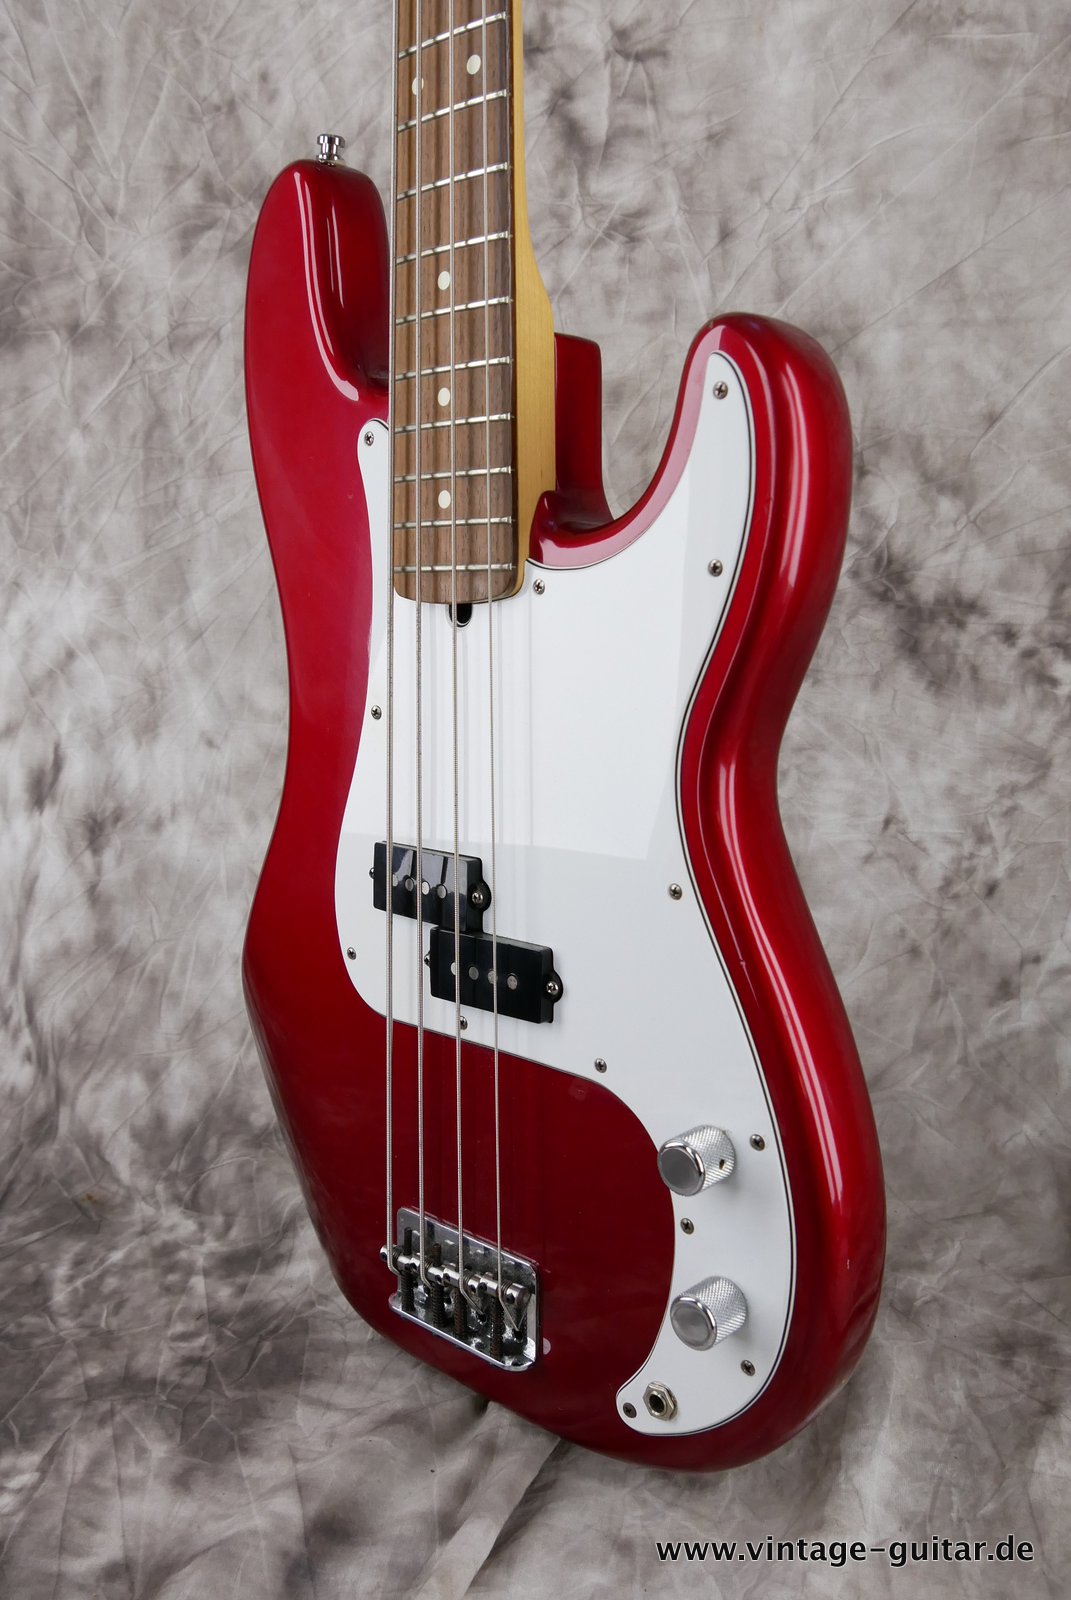 Fender-Precision-Bass-1994-candy-apple-red-006.JPG